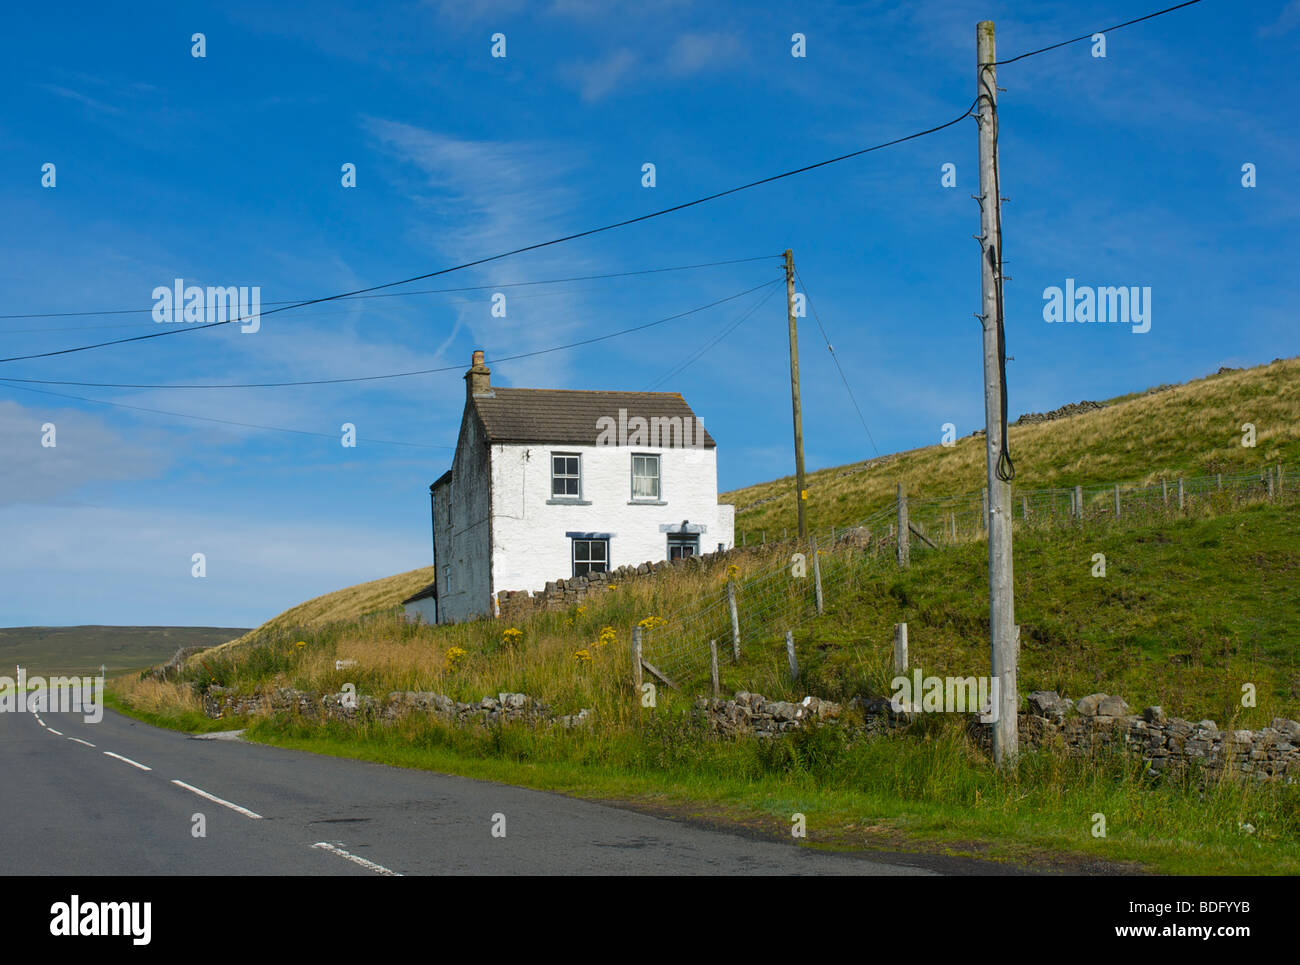 Whitewashed house in Upper Teesdale, County Durham, England UK Stock Photo